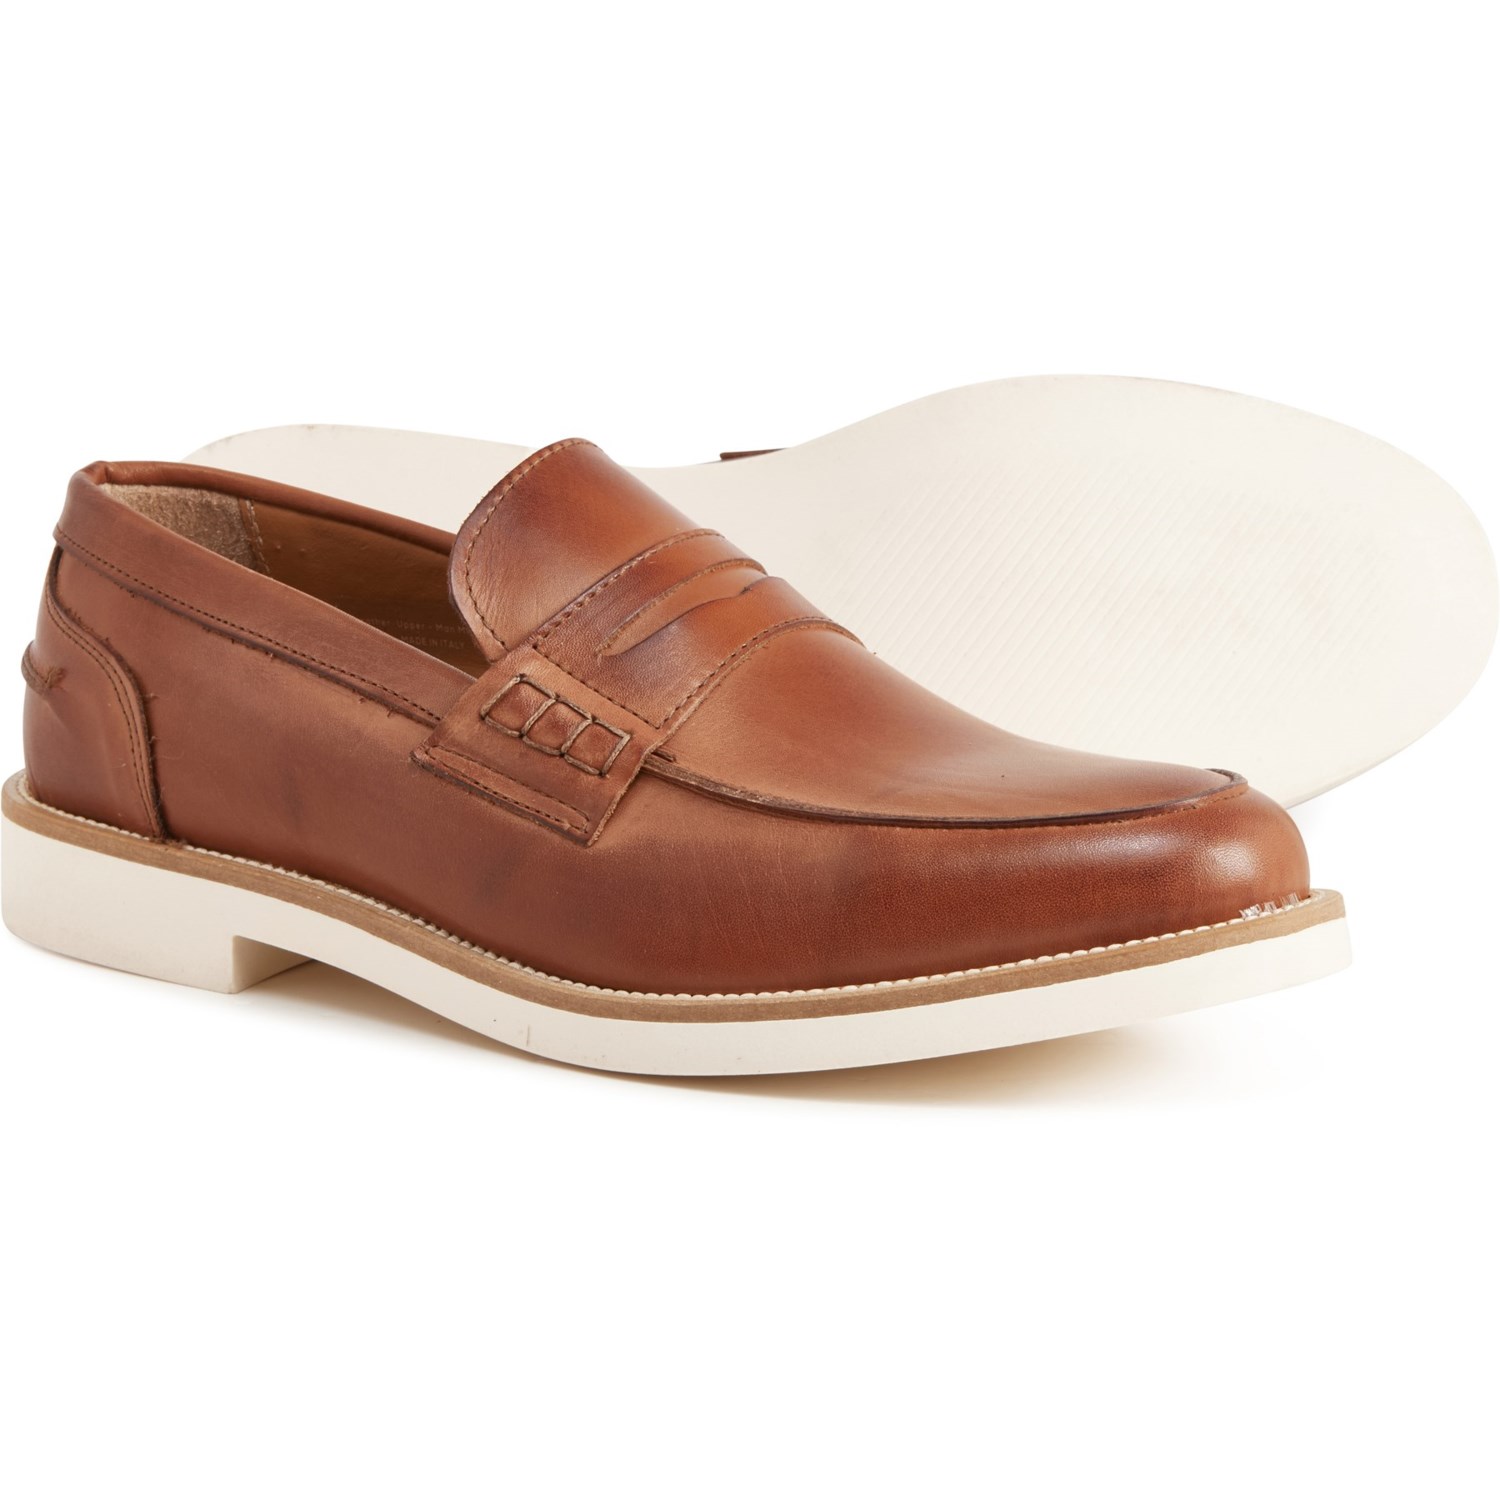 ITALIA DIFFERENCE Made in Italy Penny Loafers (For Men) - Save 44%